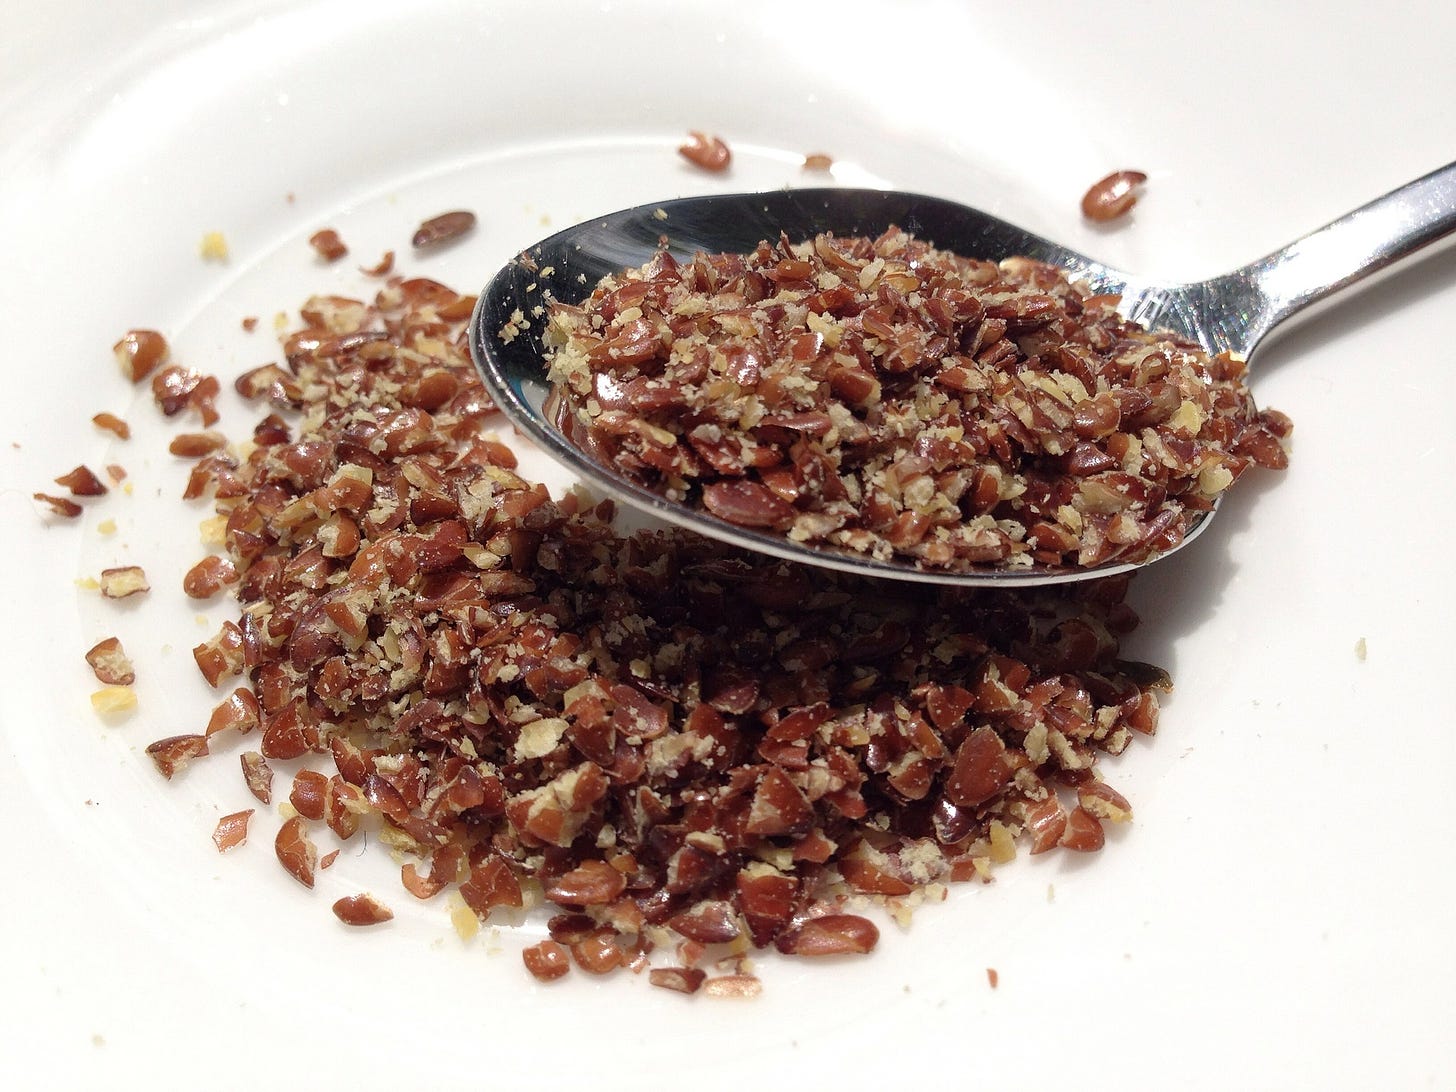 Broken flaxseeds in a spoon and on a plate